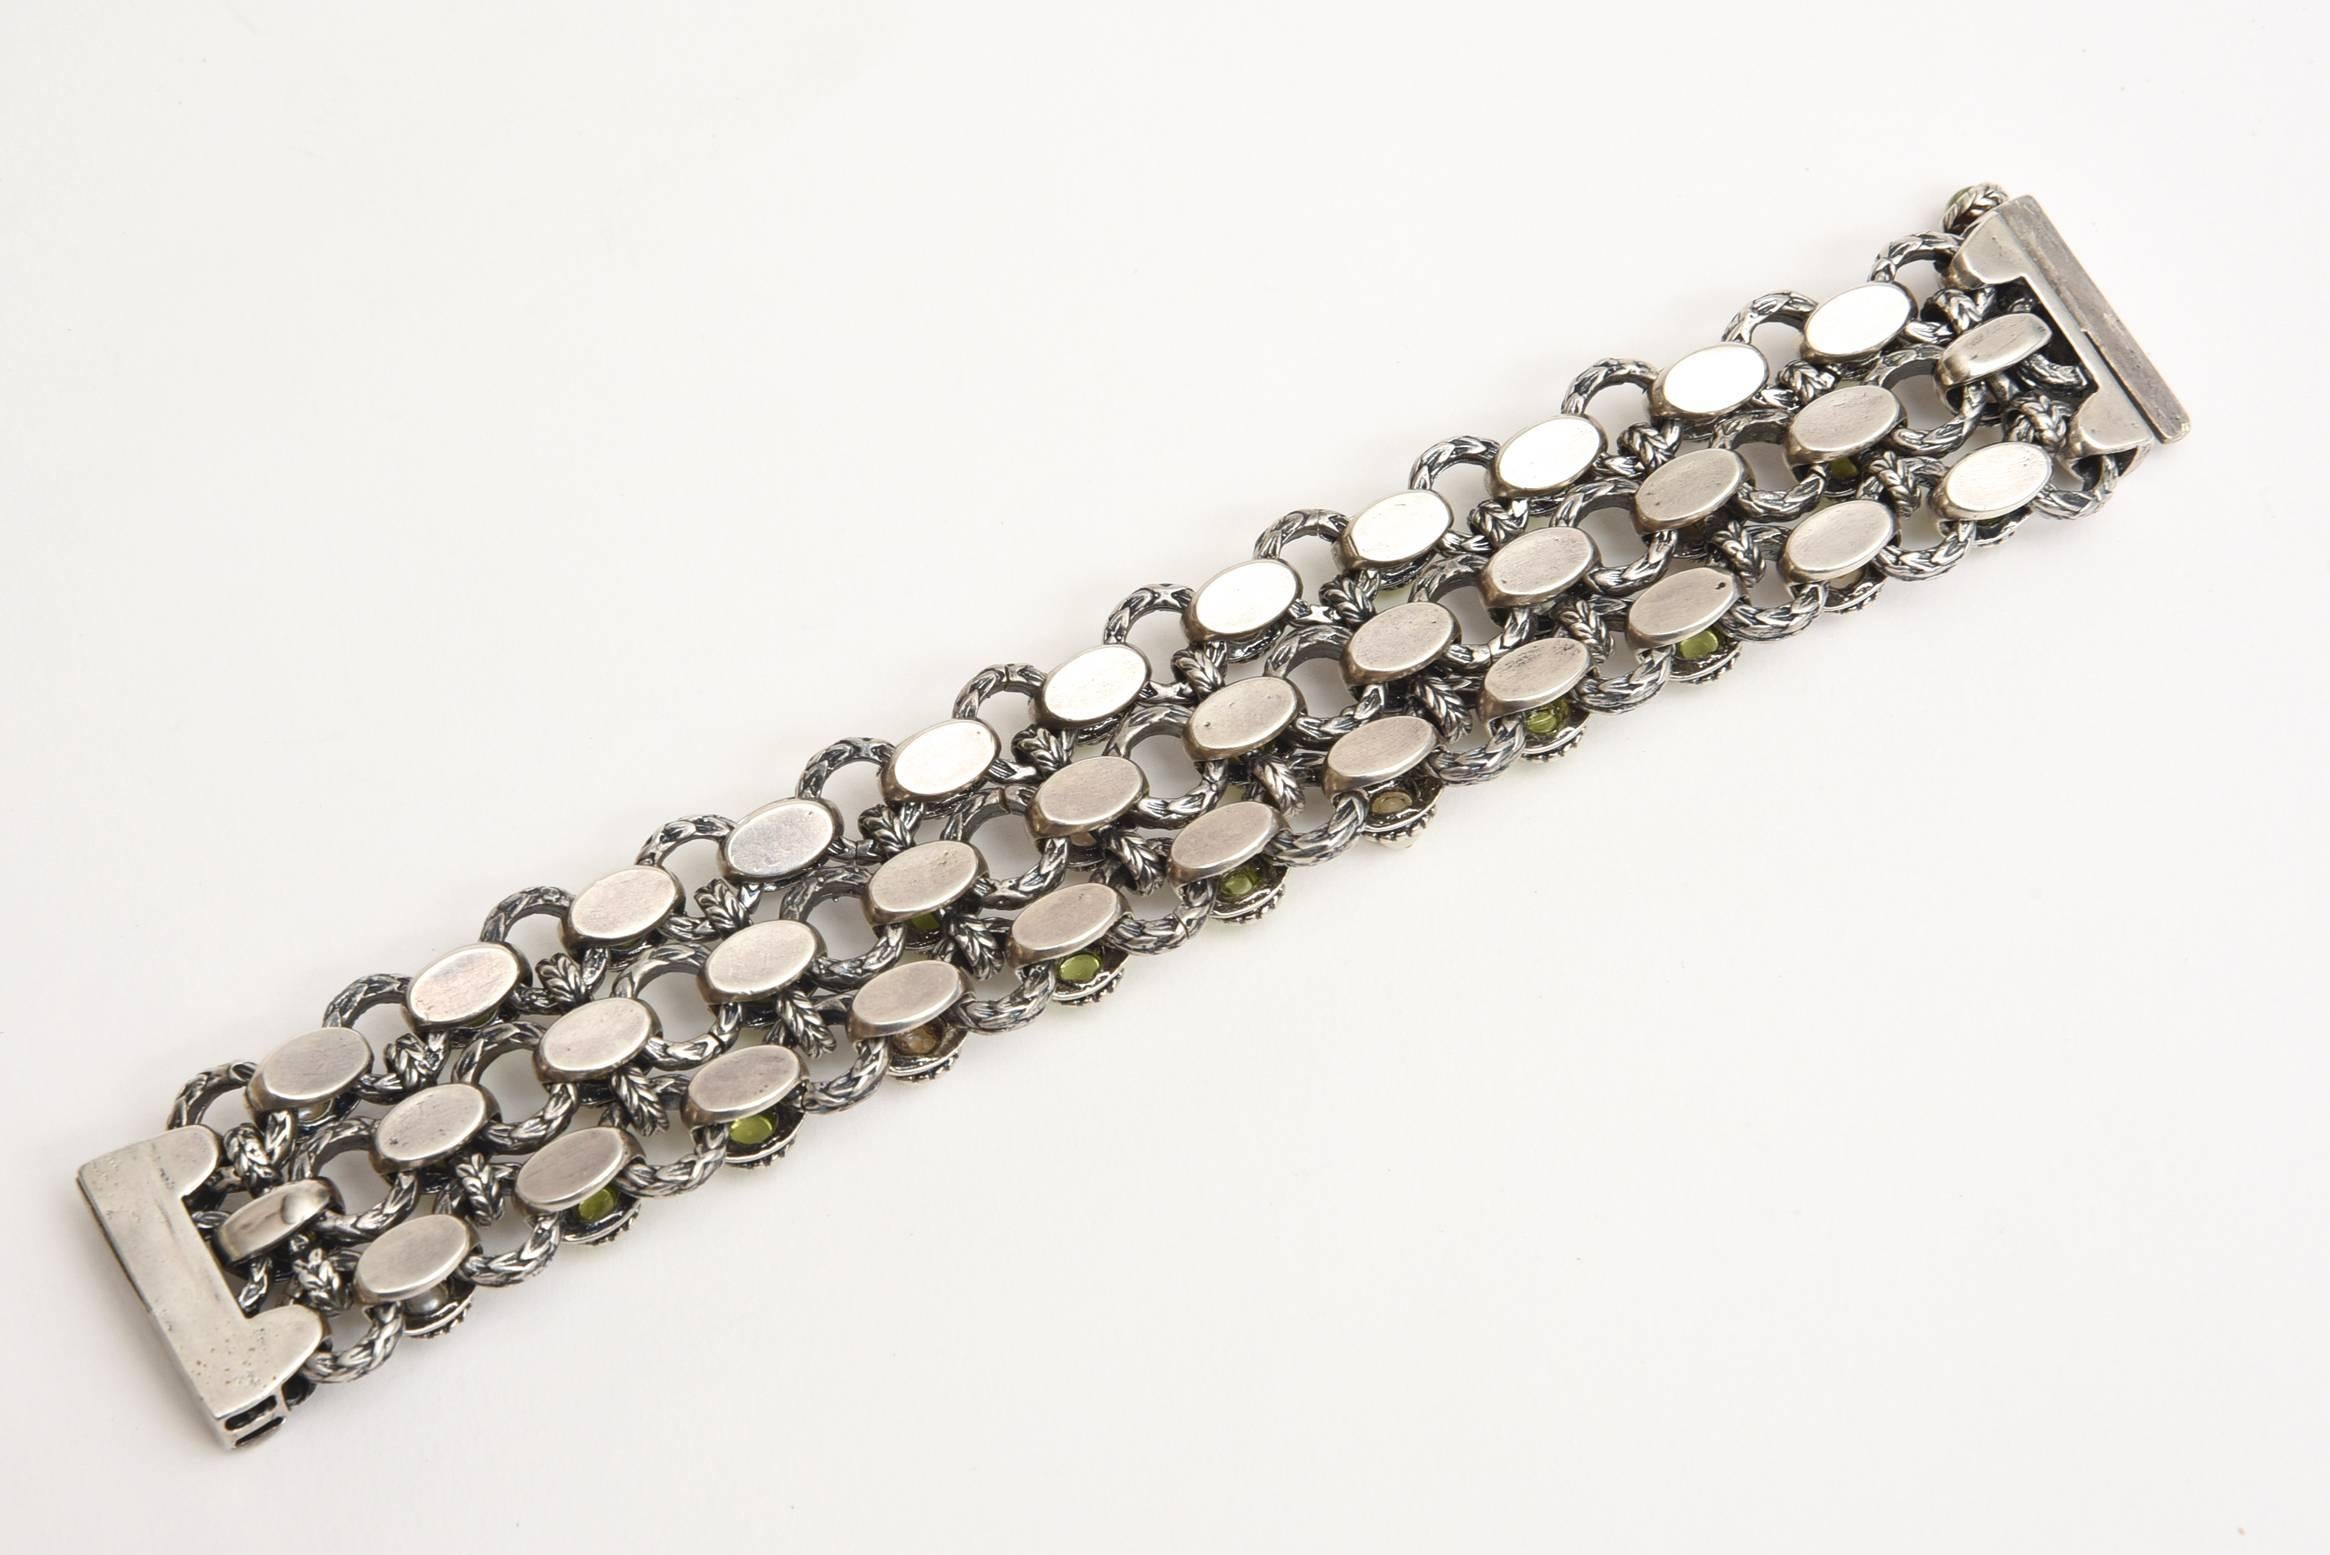 This beautiful bracelet is set against sterling silver with rows of alternating real pearls and real peridot. It has good weight to it. The workmanship of the silver and origin of the bracelet has the influence of India or the Pakistan or somewhere